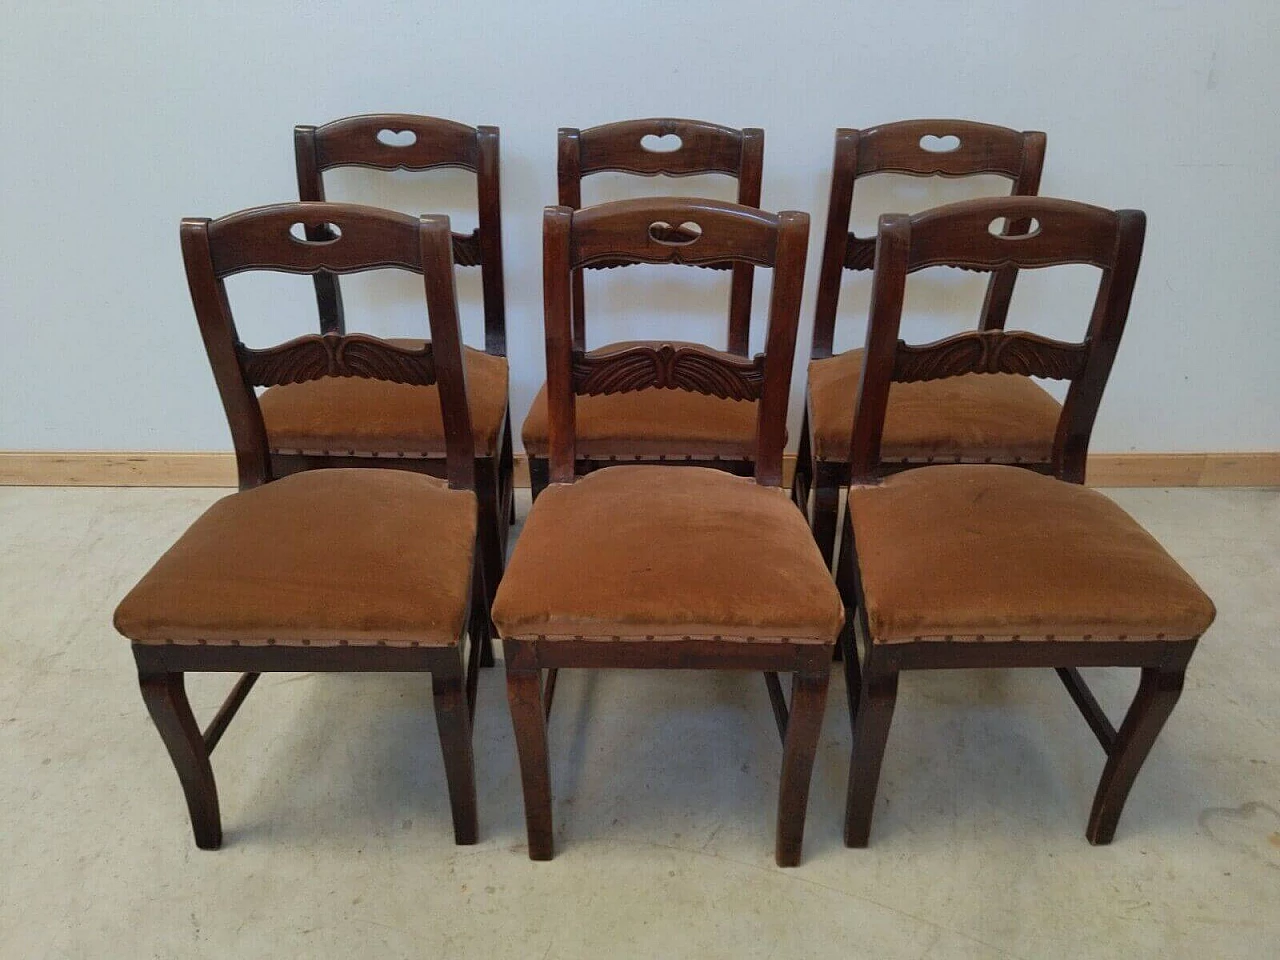 6 Empire-style walnut chairs, early 19th century 4